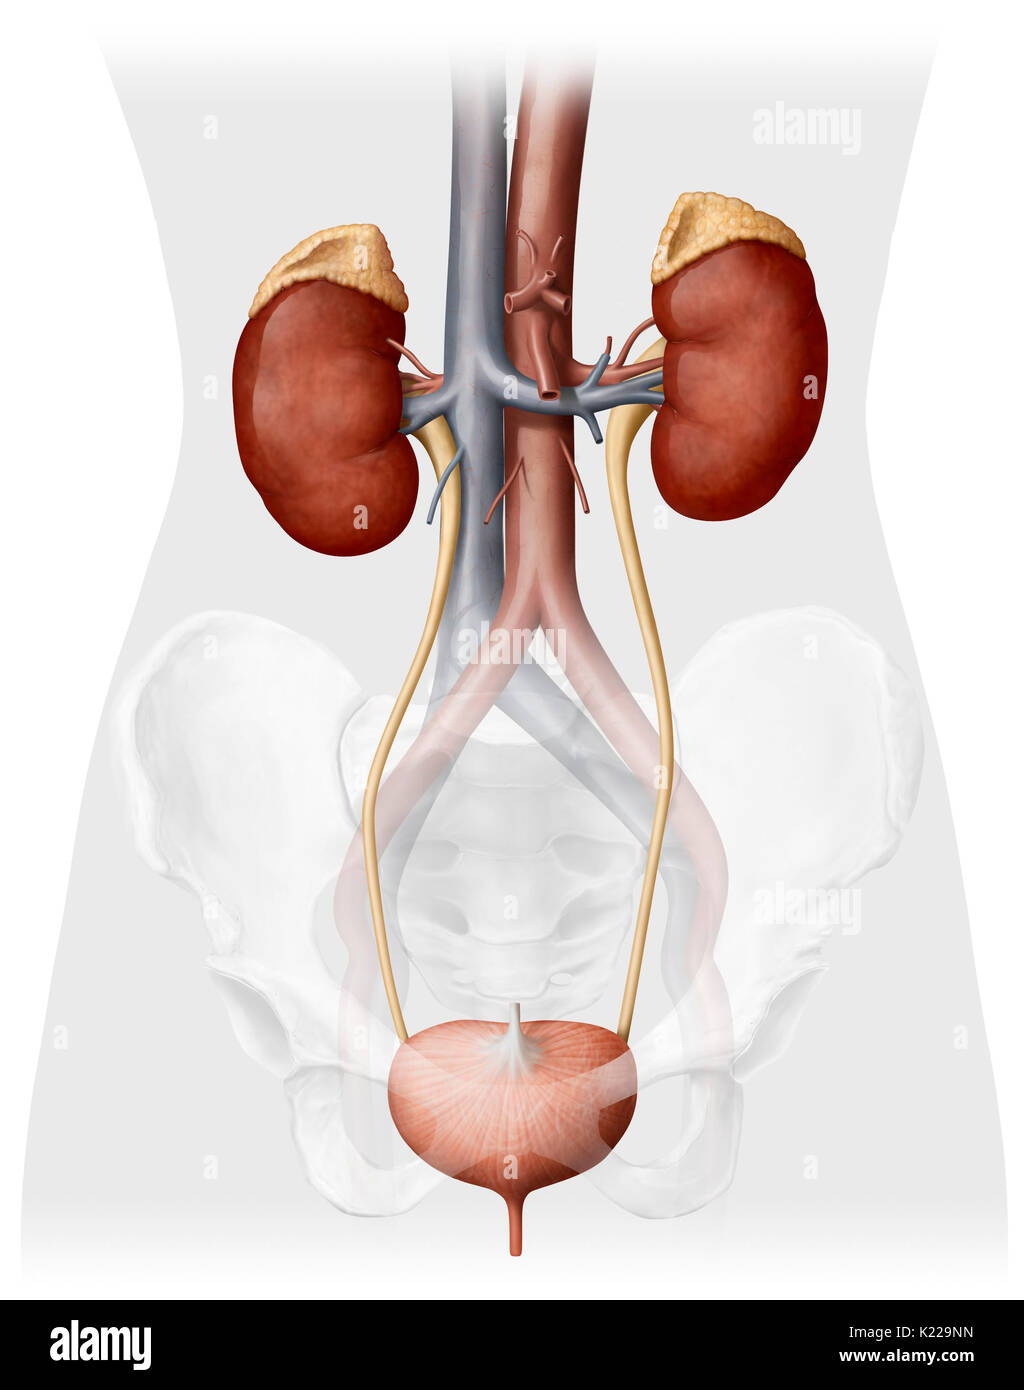 This image shows the urinary system of a woman, which includes the adrenal gland, the kidneys, the ureter, the urinary bladder and the urethra. There is also the aorta and the inferior vena cava. Stock Photo